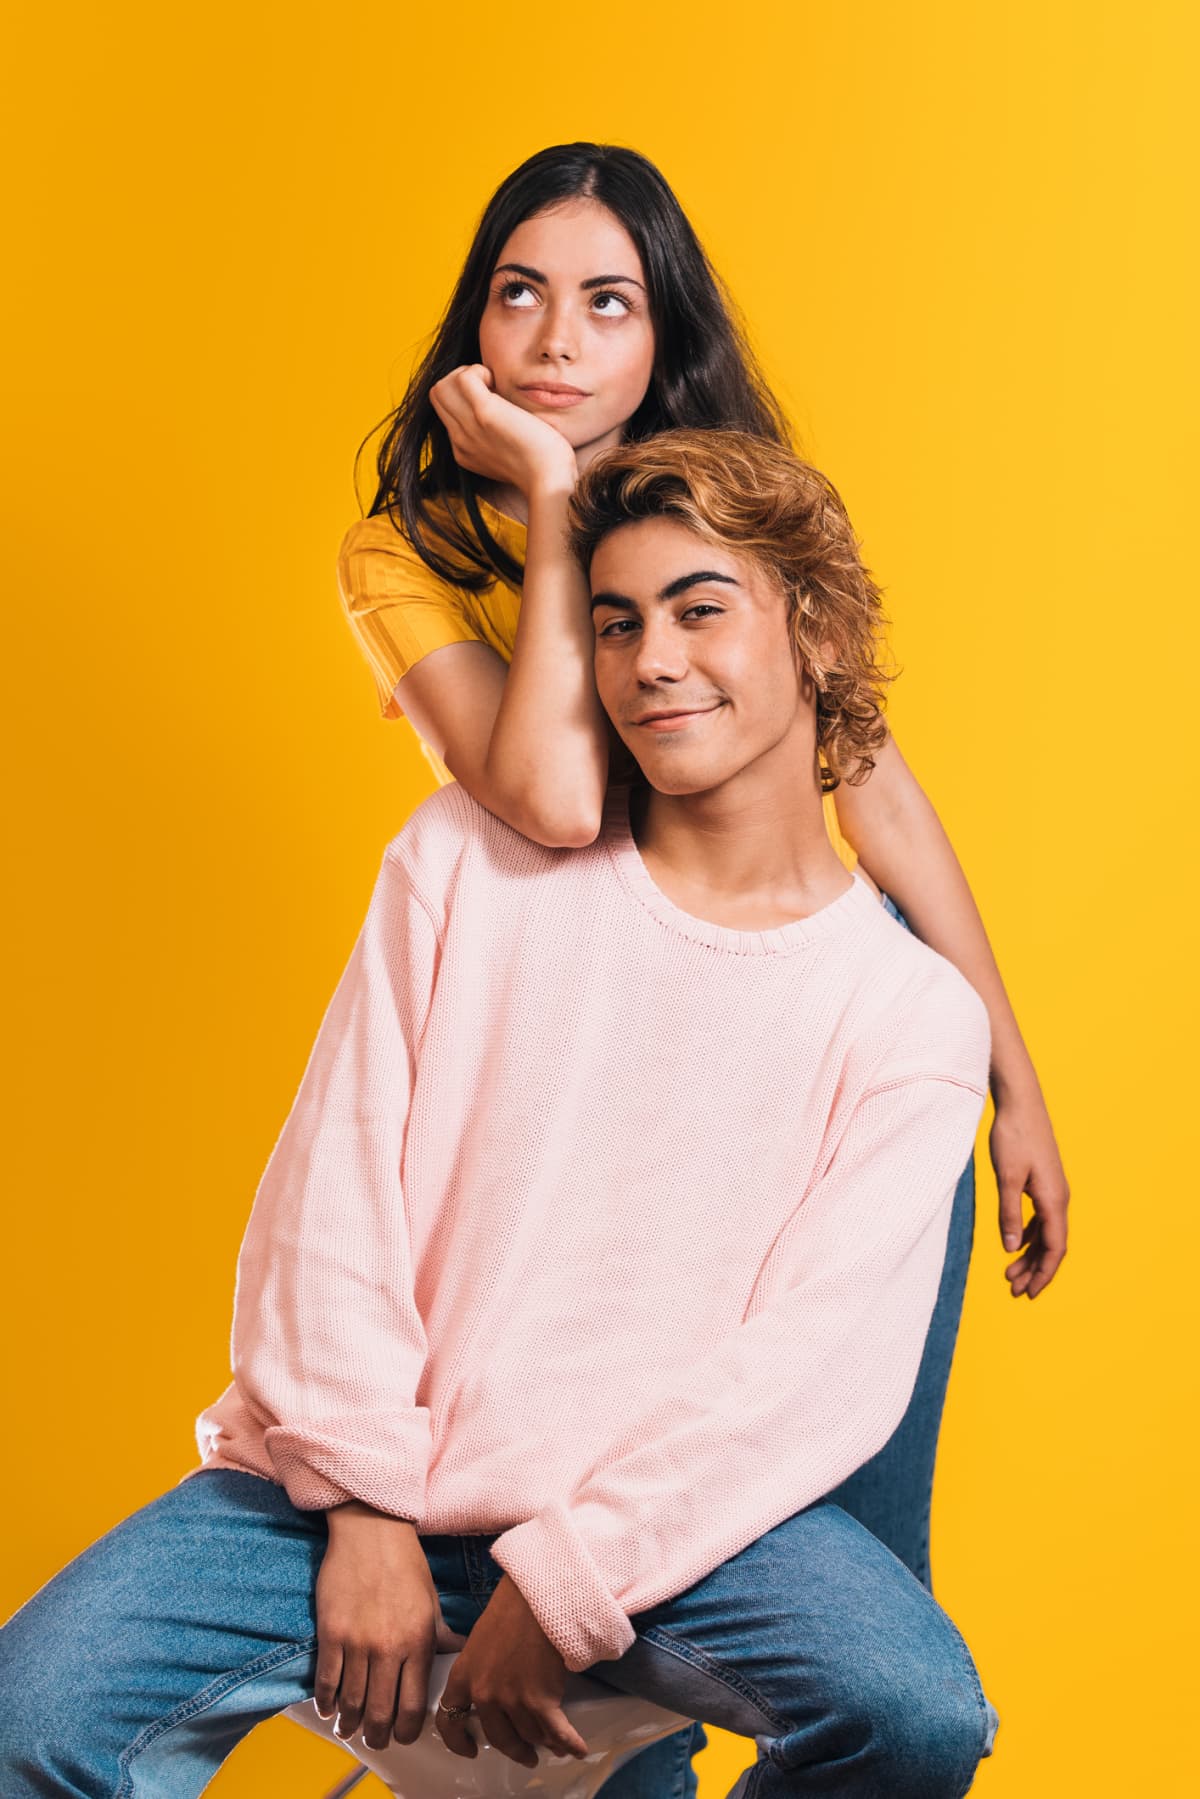 Young couple posing against a bright yellow background, the woman is standing behind the seated man rolling her eyes.